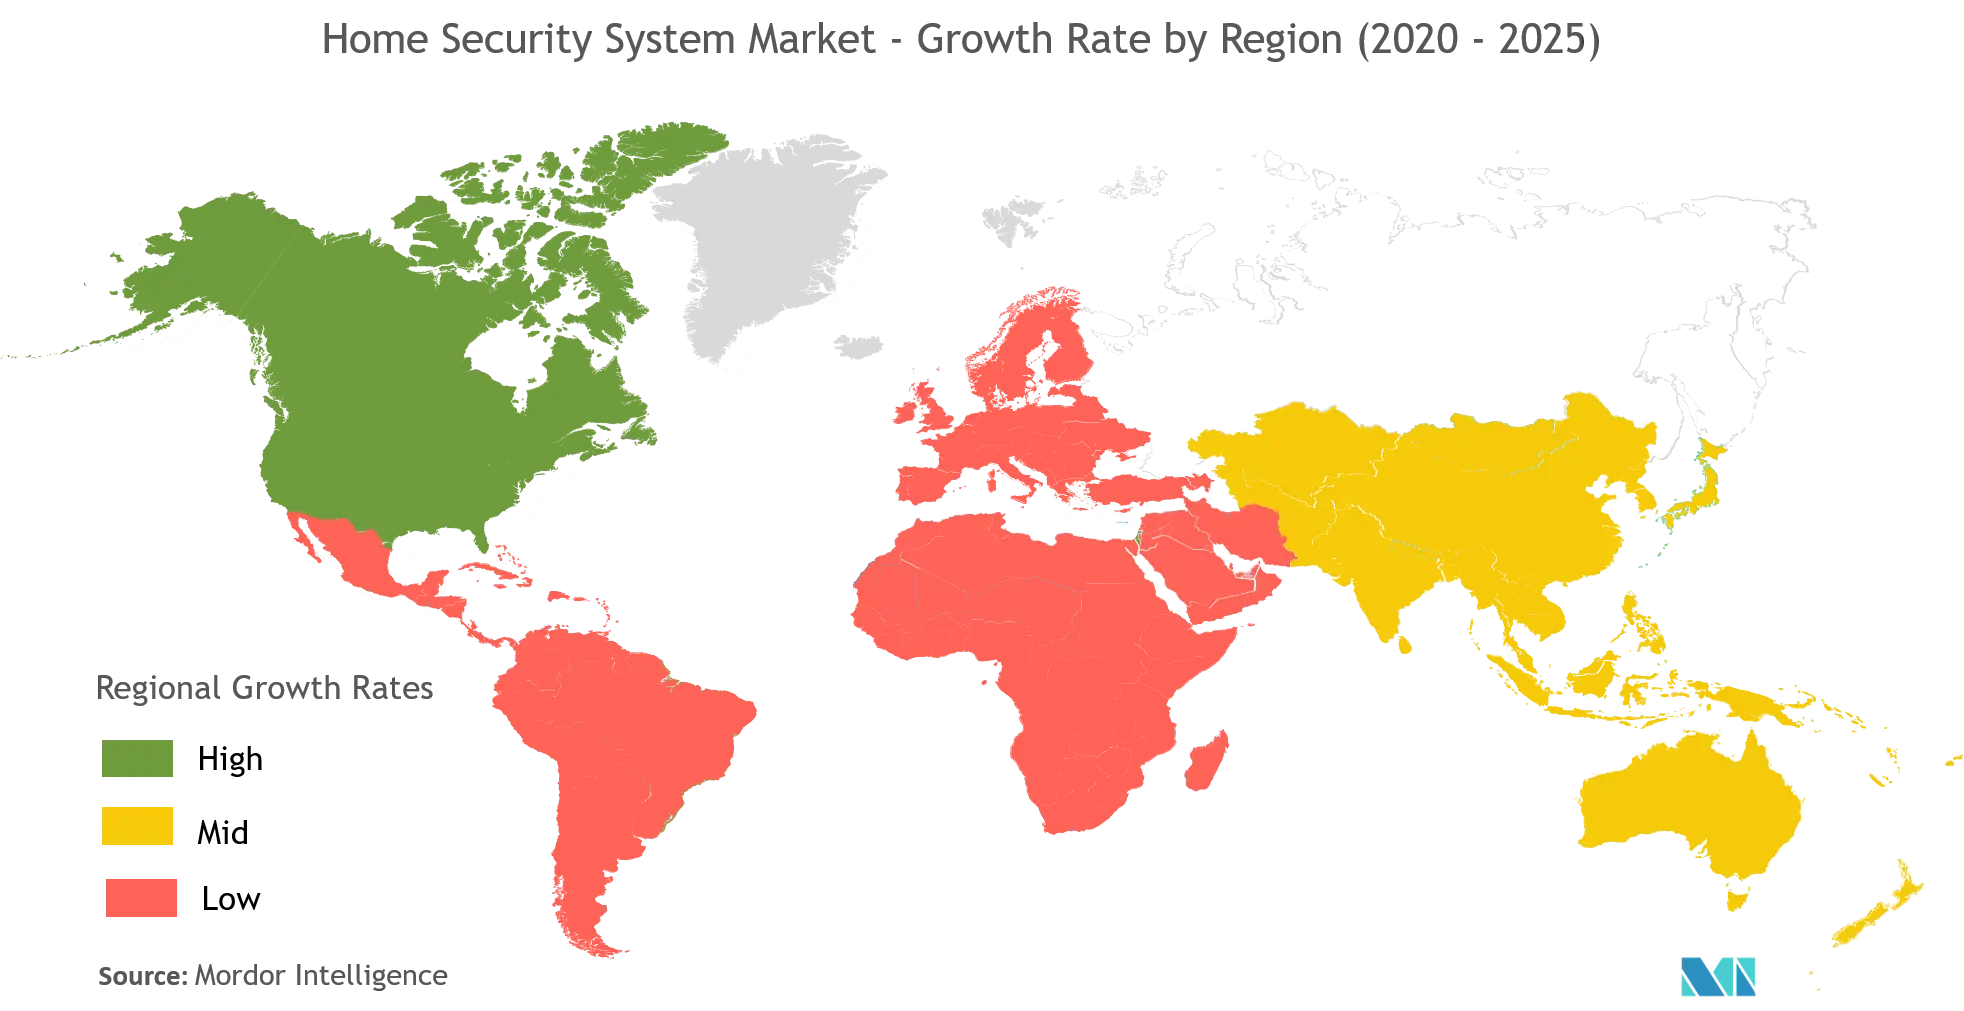 home security systems market share